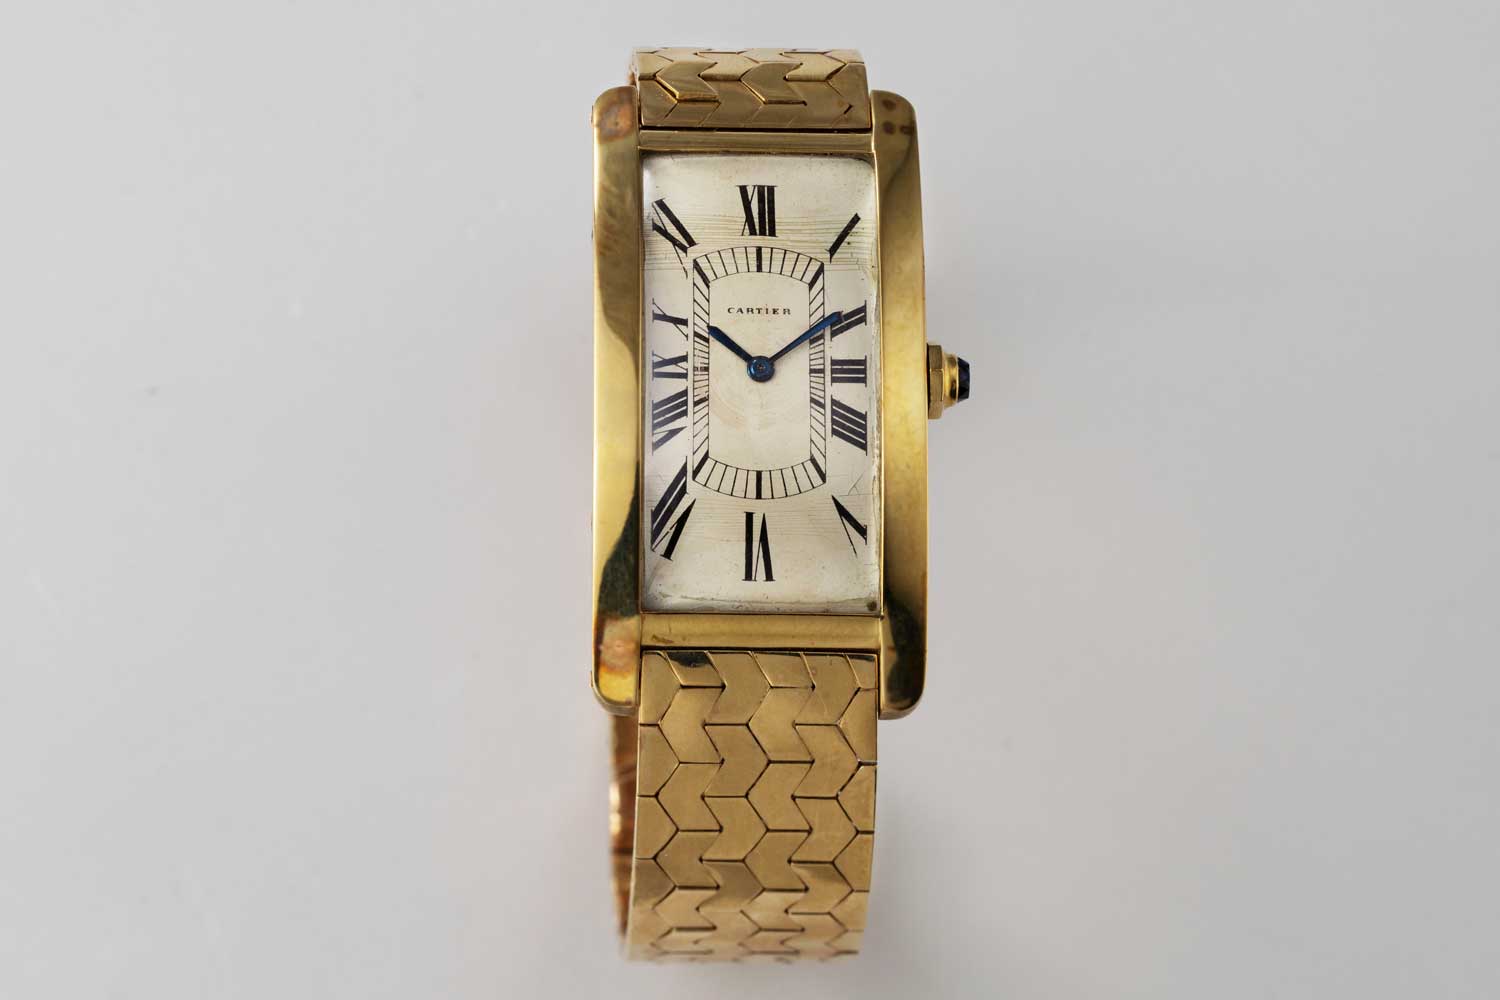 1951 yellow gold Cartier Tank Cintrée with original yellow gold bracelet; this particular example is from the private collection of Auro Montanari (©Revolution)